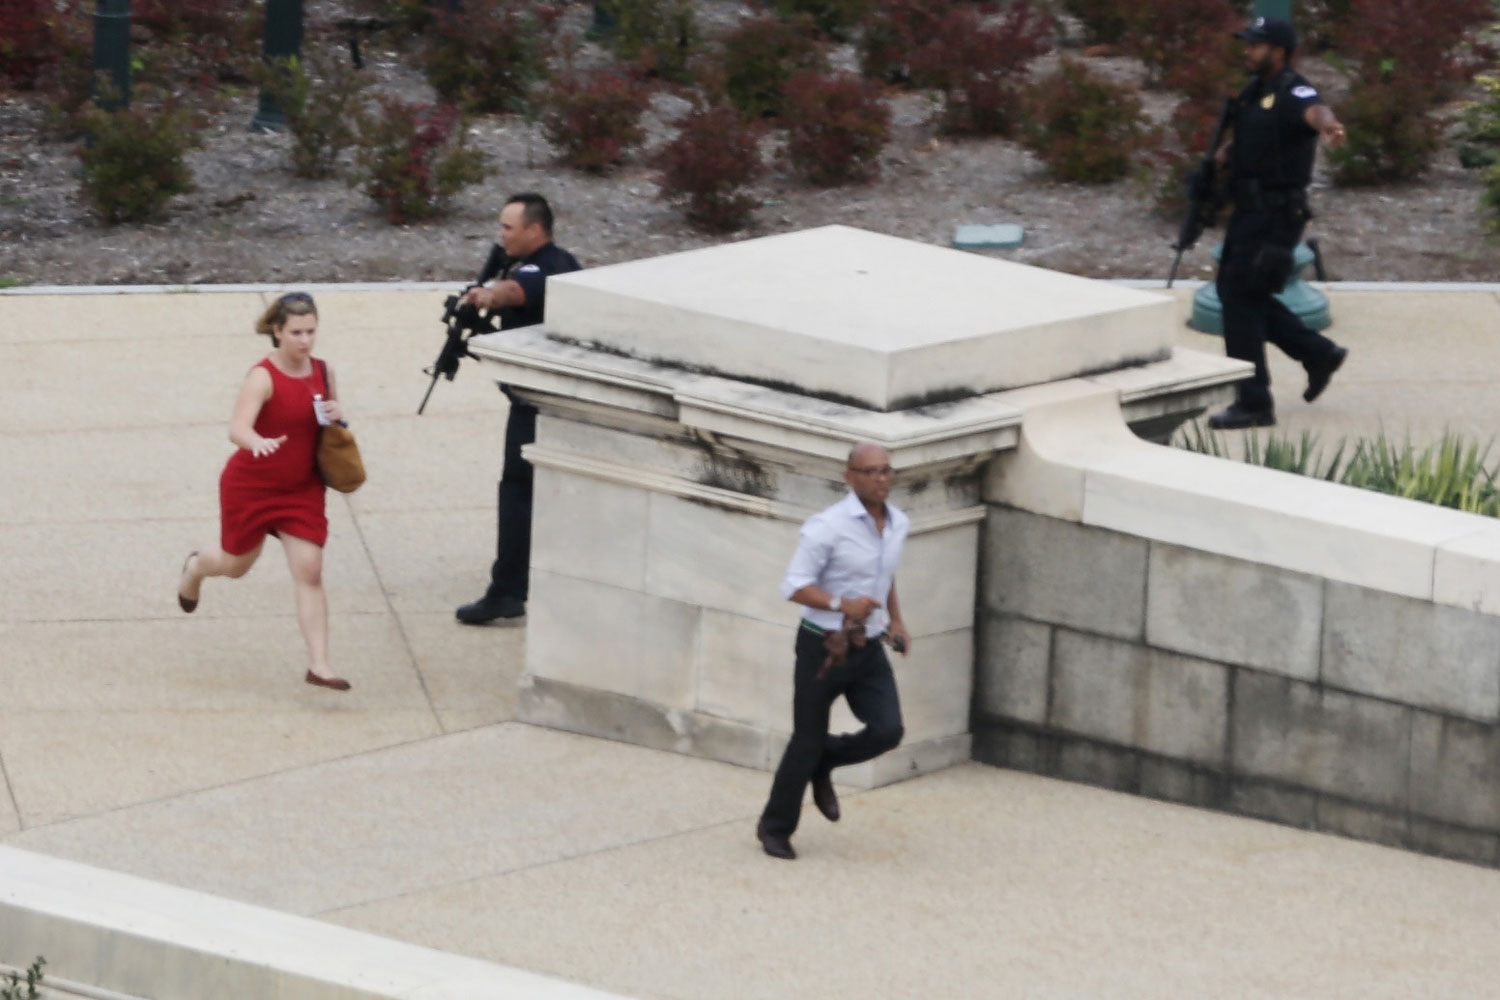 Oct. 3, 2013. Police close in on the U.S. Capitol as people run for cover after reports of a shooting on Capitol Hill in Washington, DC. The Capitol and the White House were placed on lockdown after an  active shooter  situation was reported.